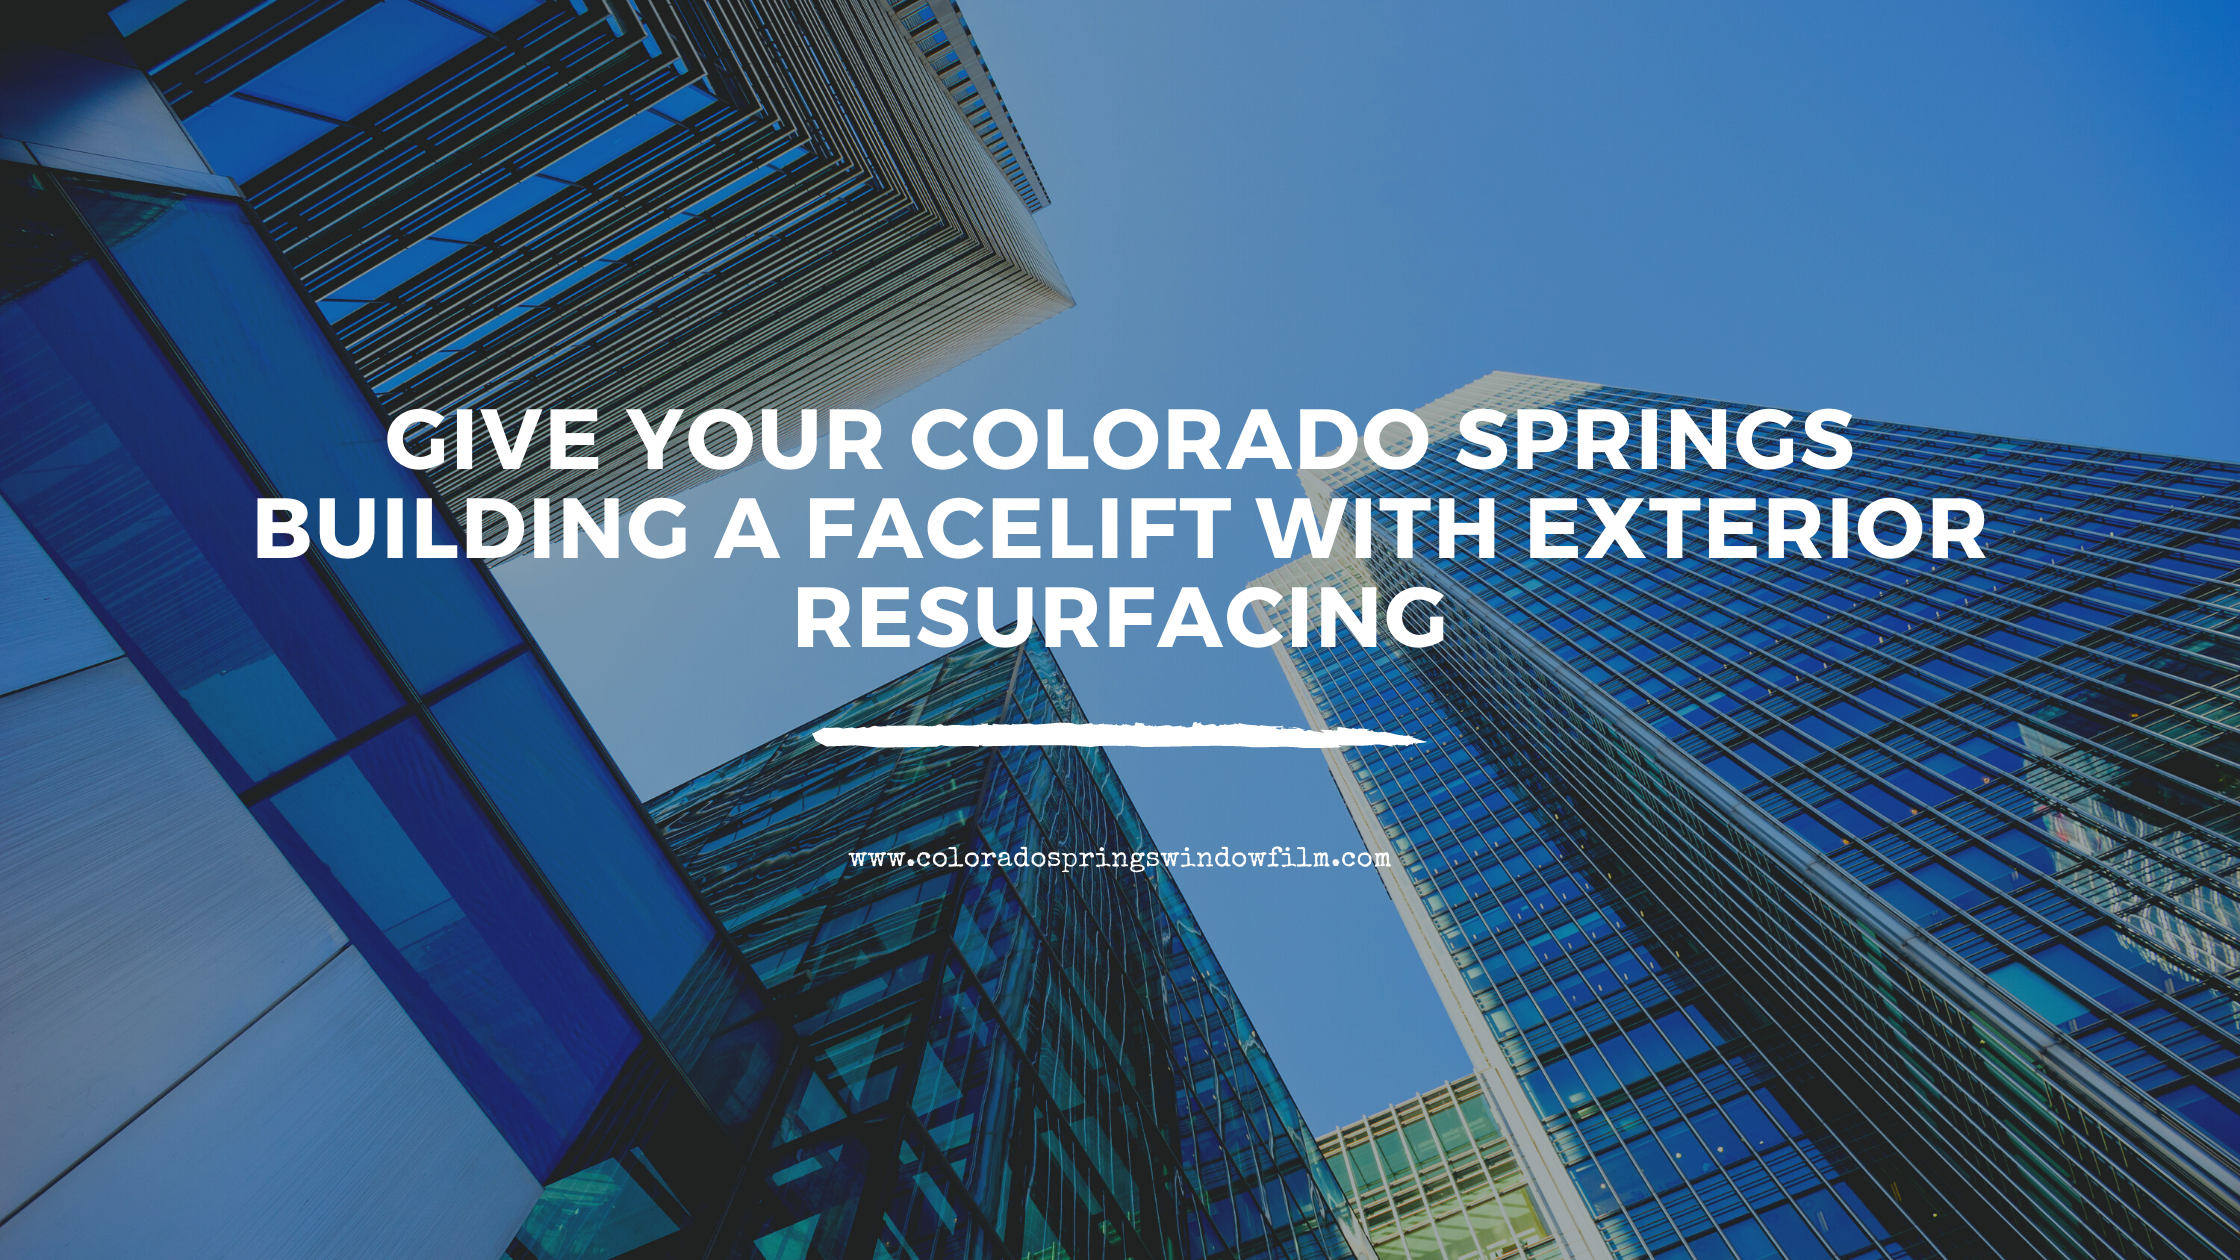 Give Your Colorado Springs Building a Facelift with Exterior Resurfacing